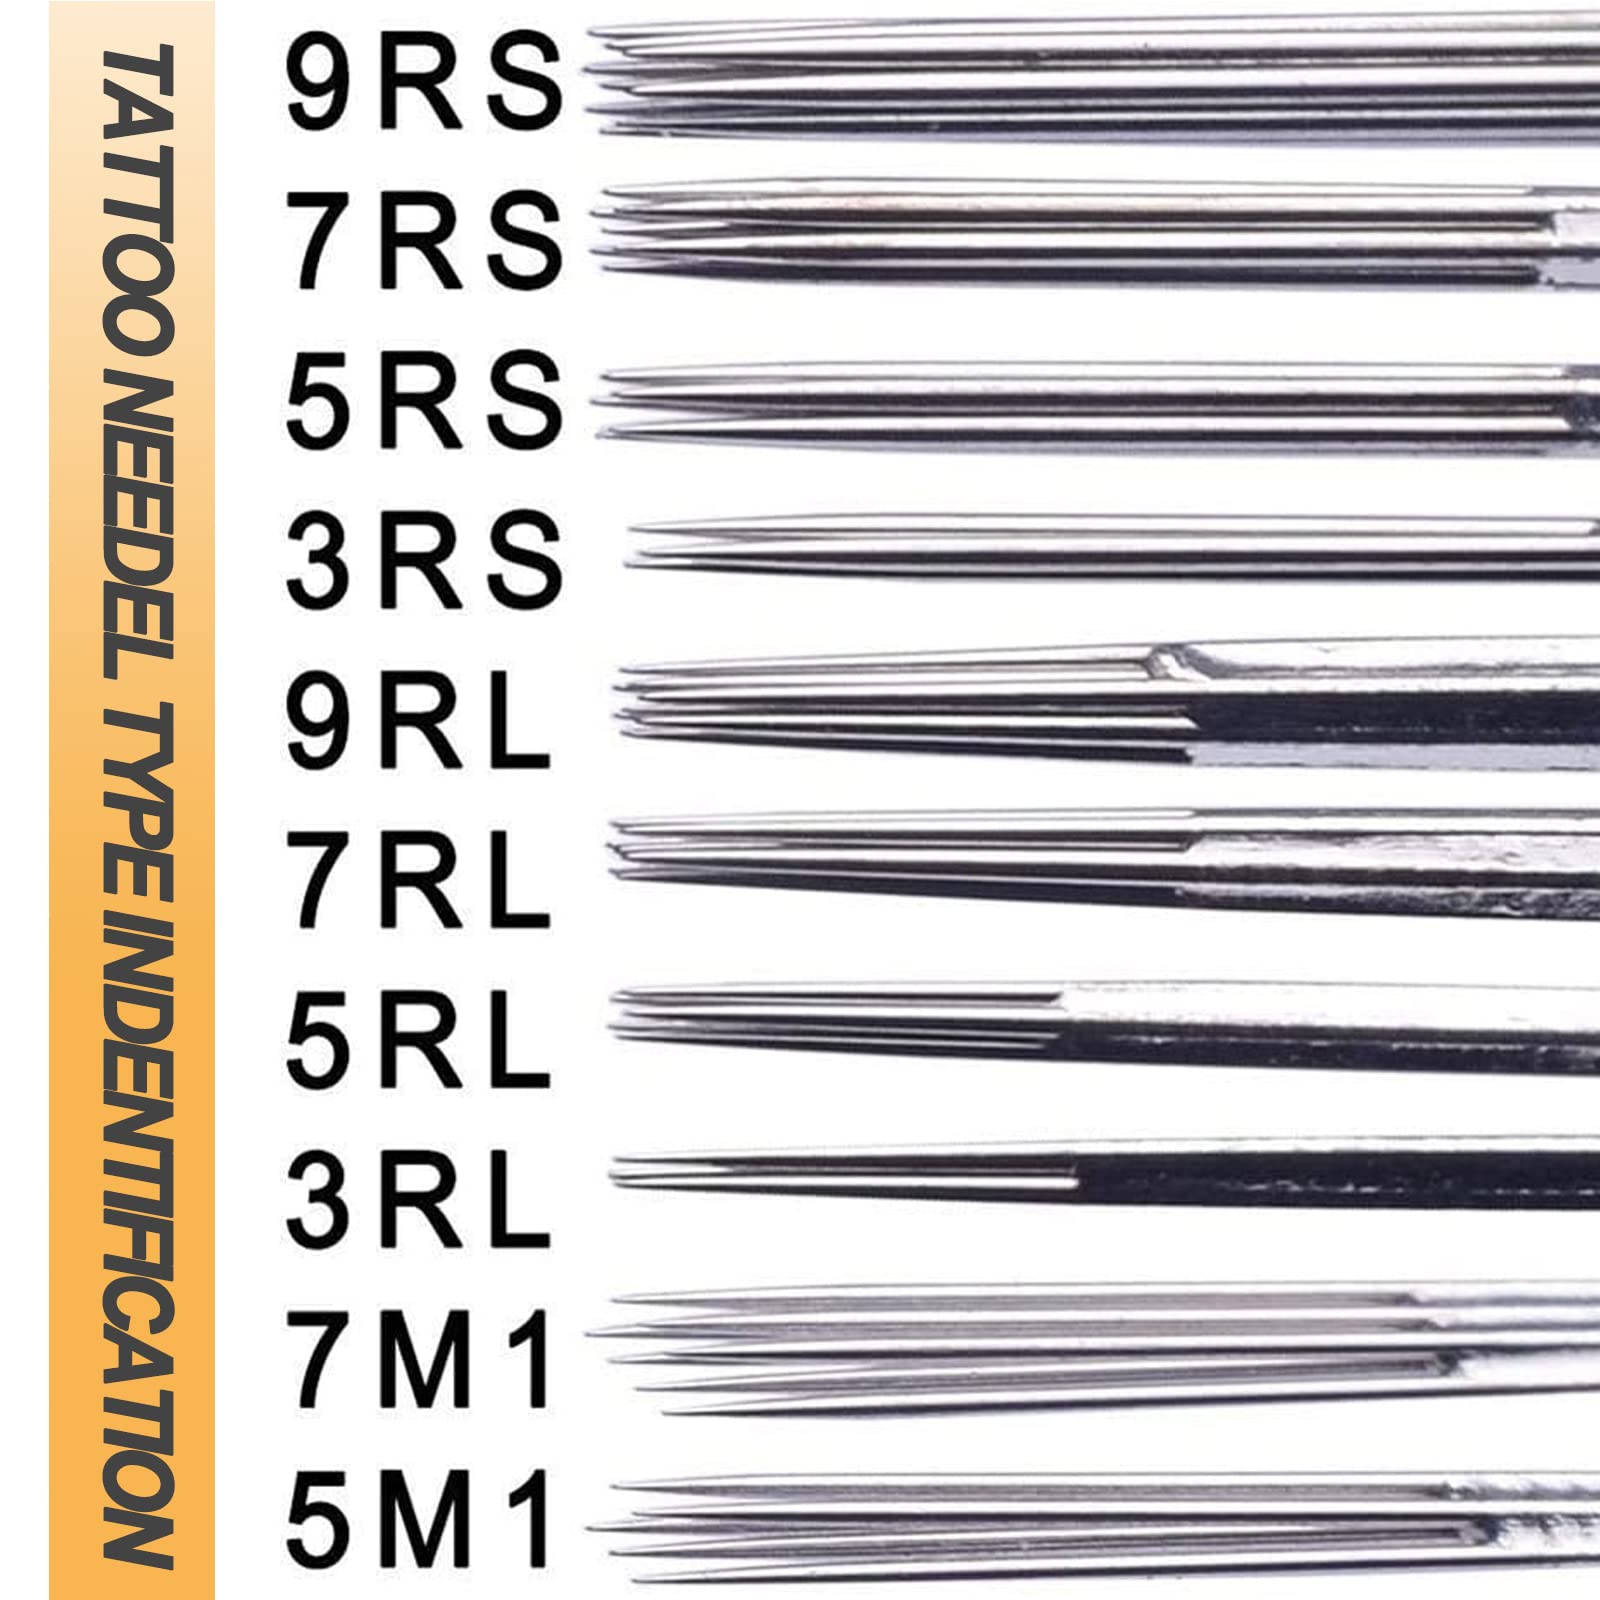 Tattoo Needles - Yuelong 100 Pieces Disposable Mixed Tattoo Guns Needles 3rl, 5rl, 7rl, 9rl, 3rs, 5rs, 7rs, 9rs, 5m1, 7m1, Used For Tattoo Machine,Tattoo Kit and Tattoo Supplies